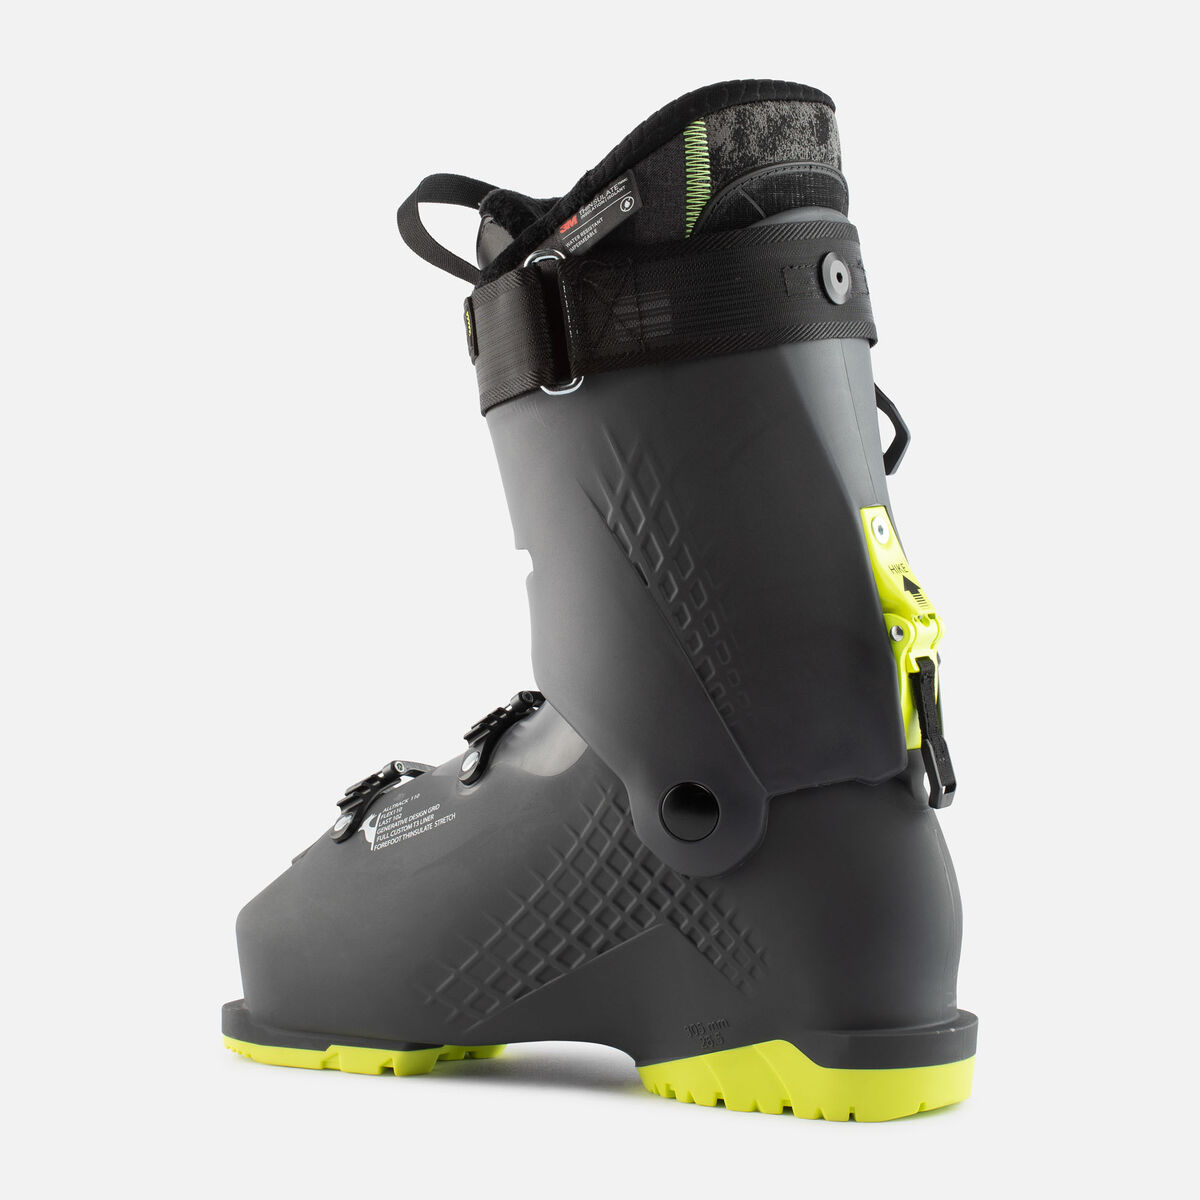 Rossignol Chaussures de Ski All Mountain Homme Track 110